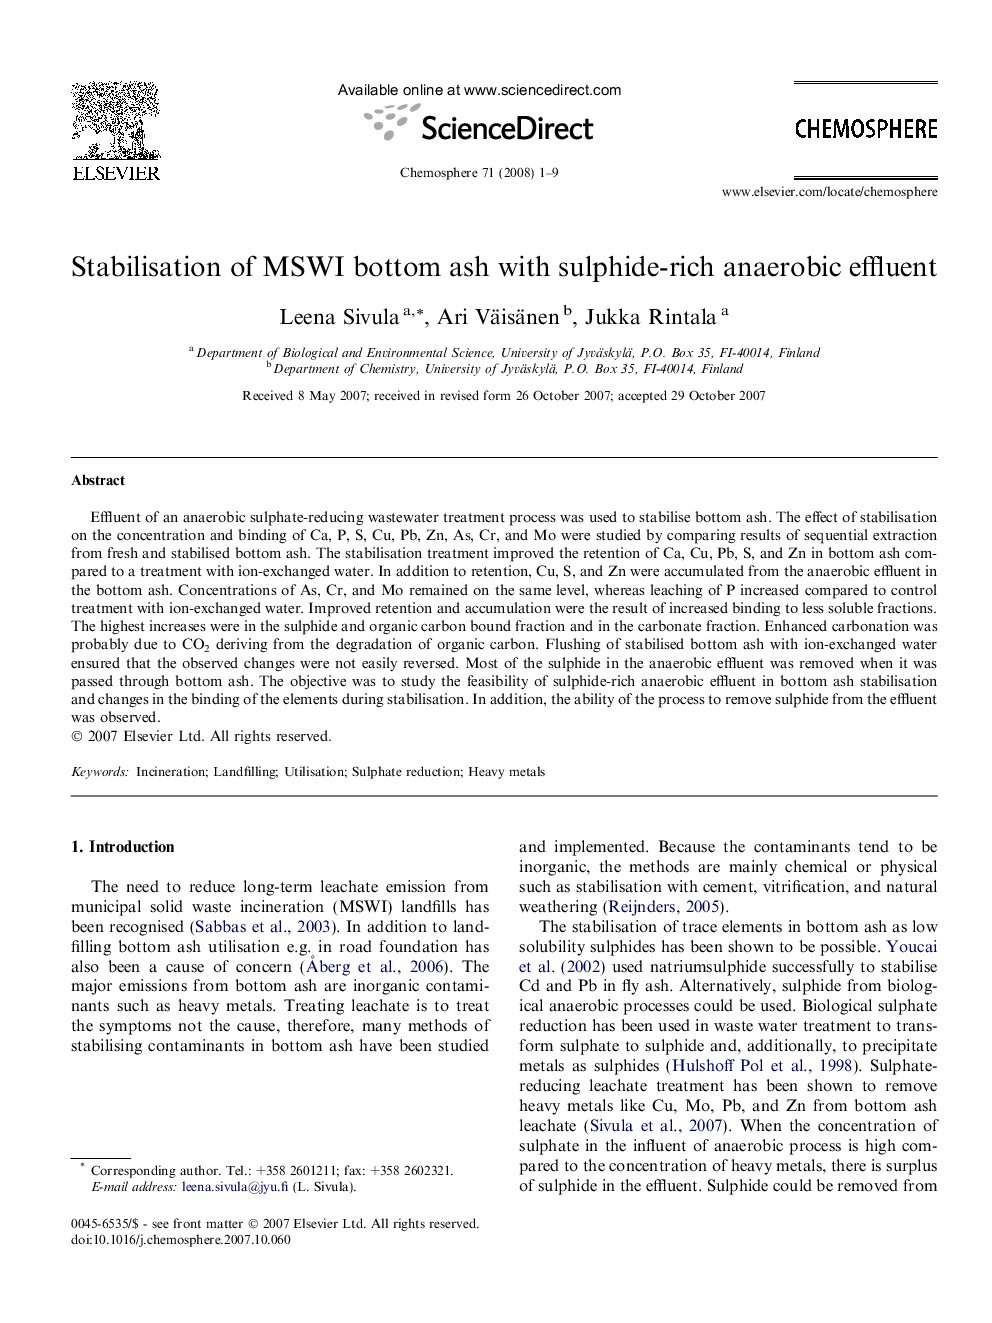 Stabilisation of MSWI bottom ash with sulphide-rich anaerobic effluent